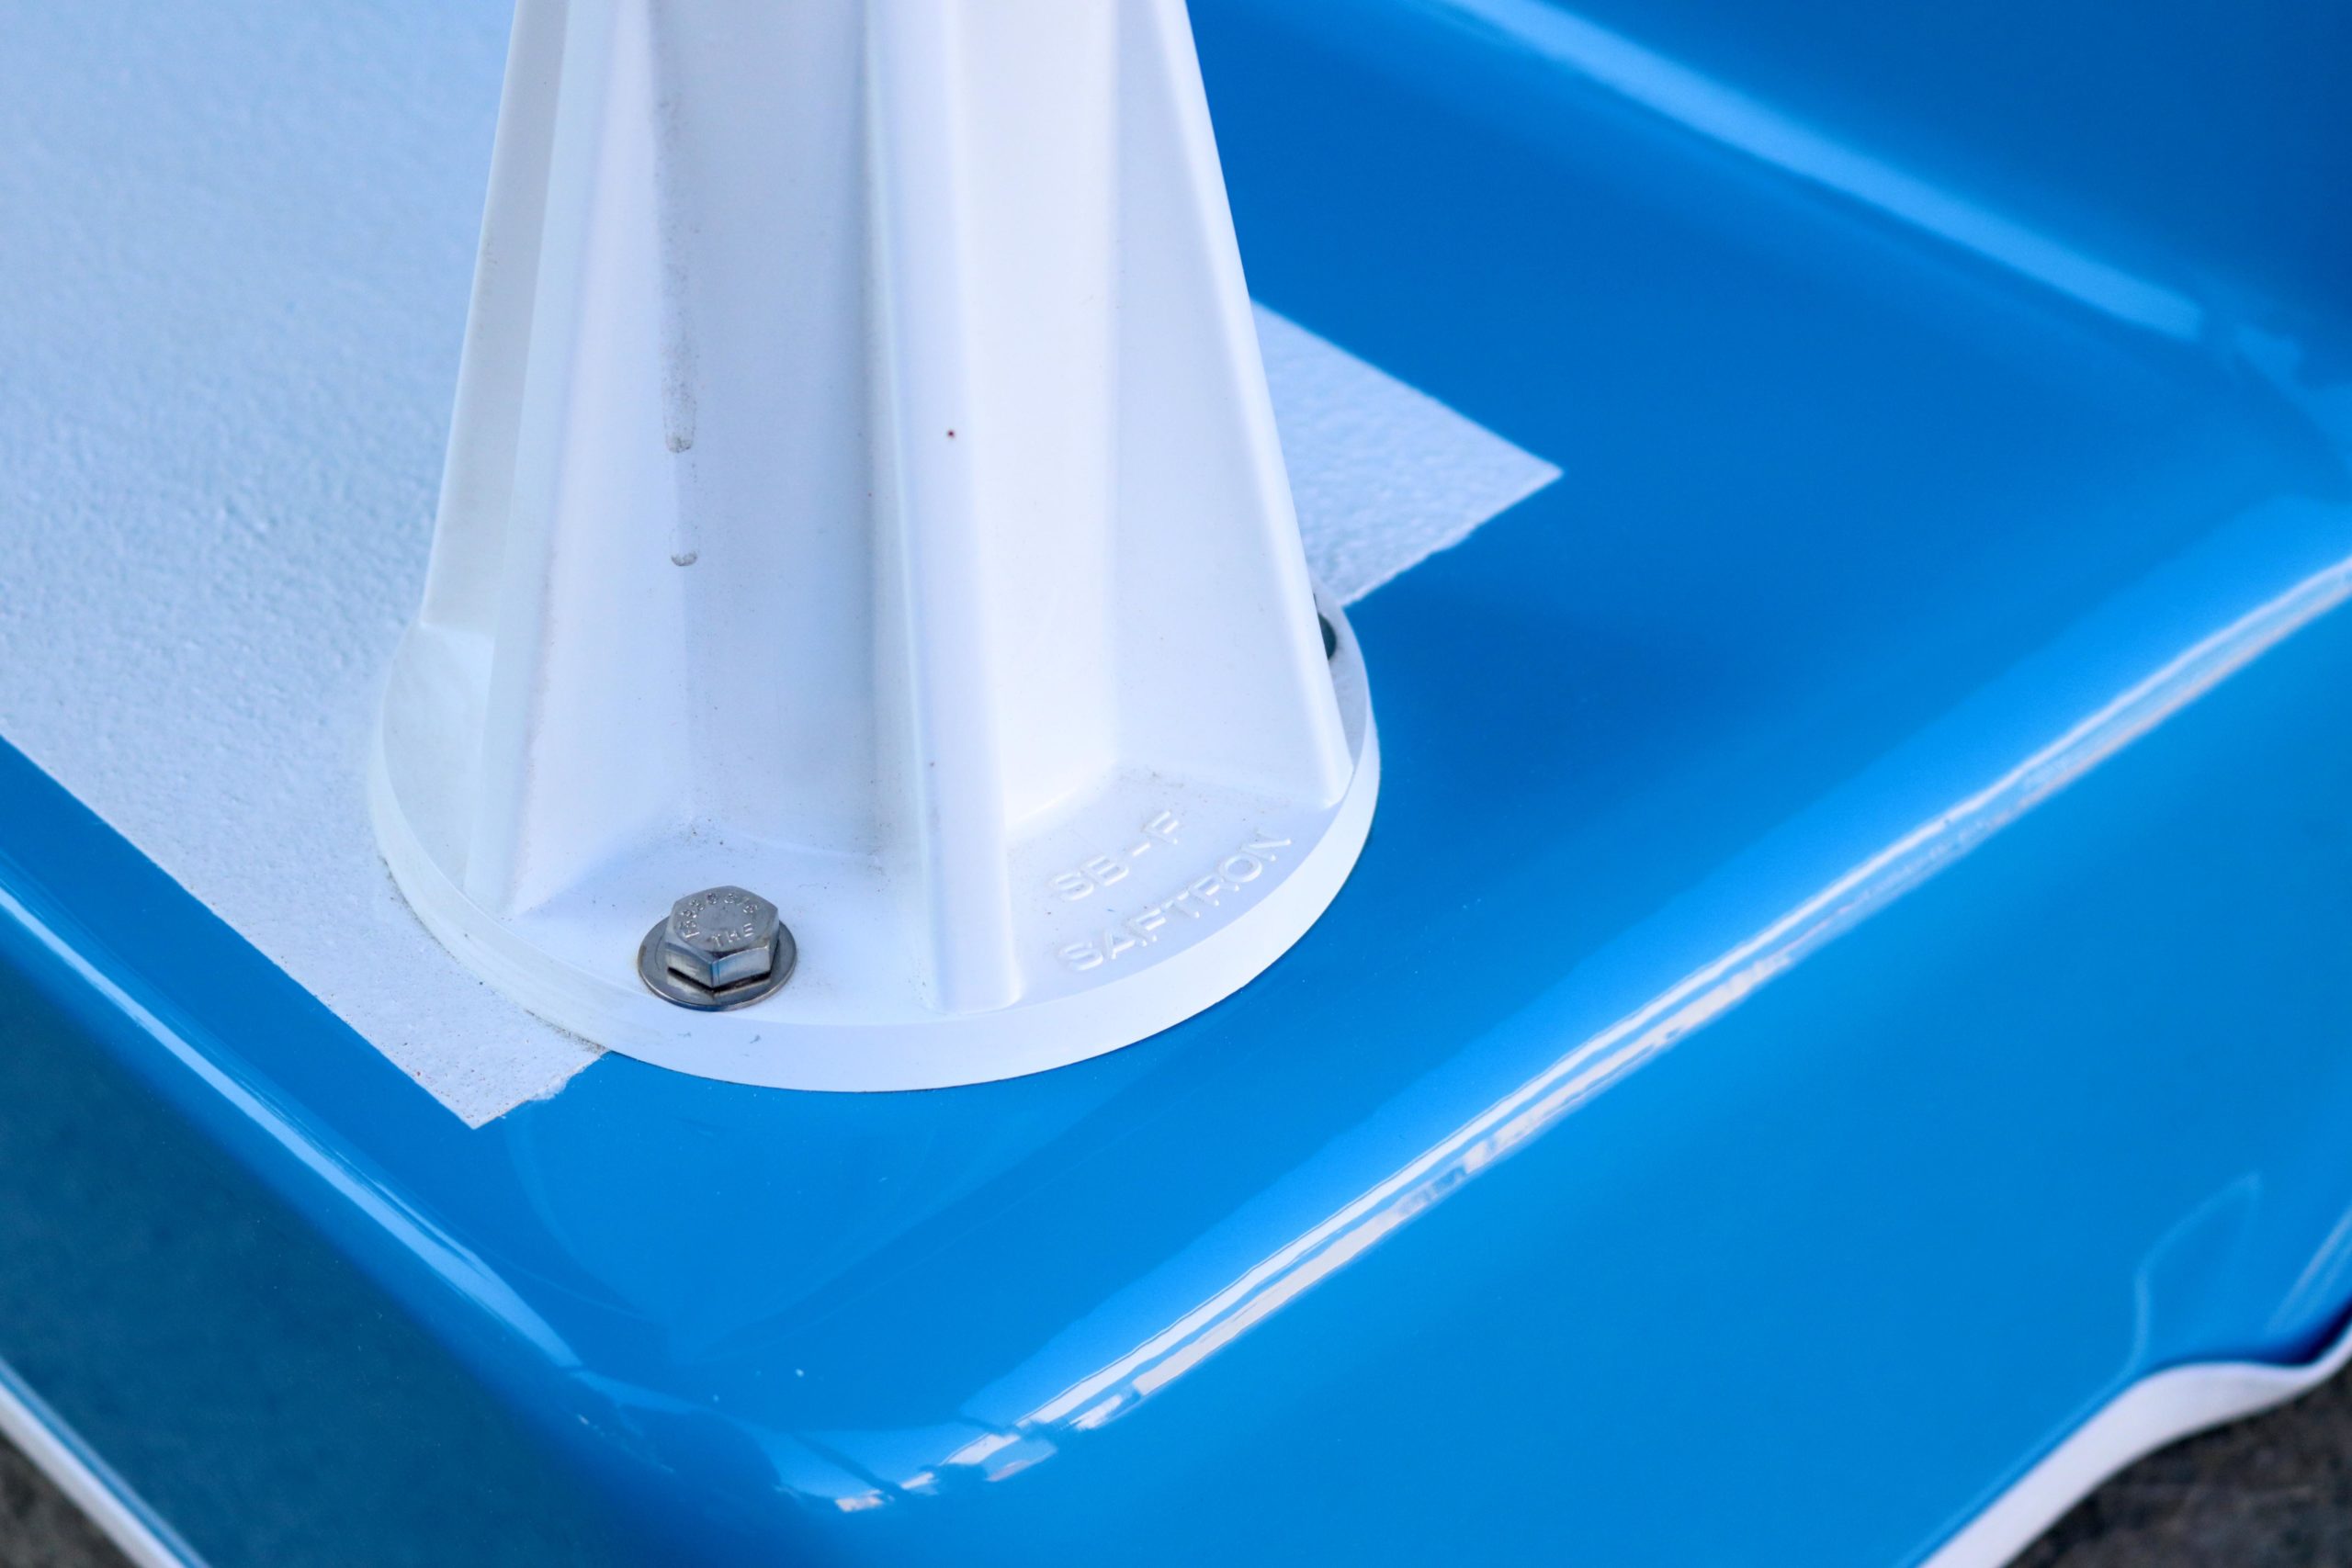 Close-up of the safety bar connection to pool stair tread